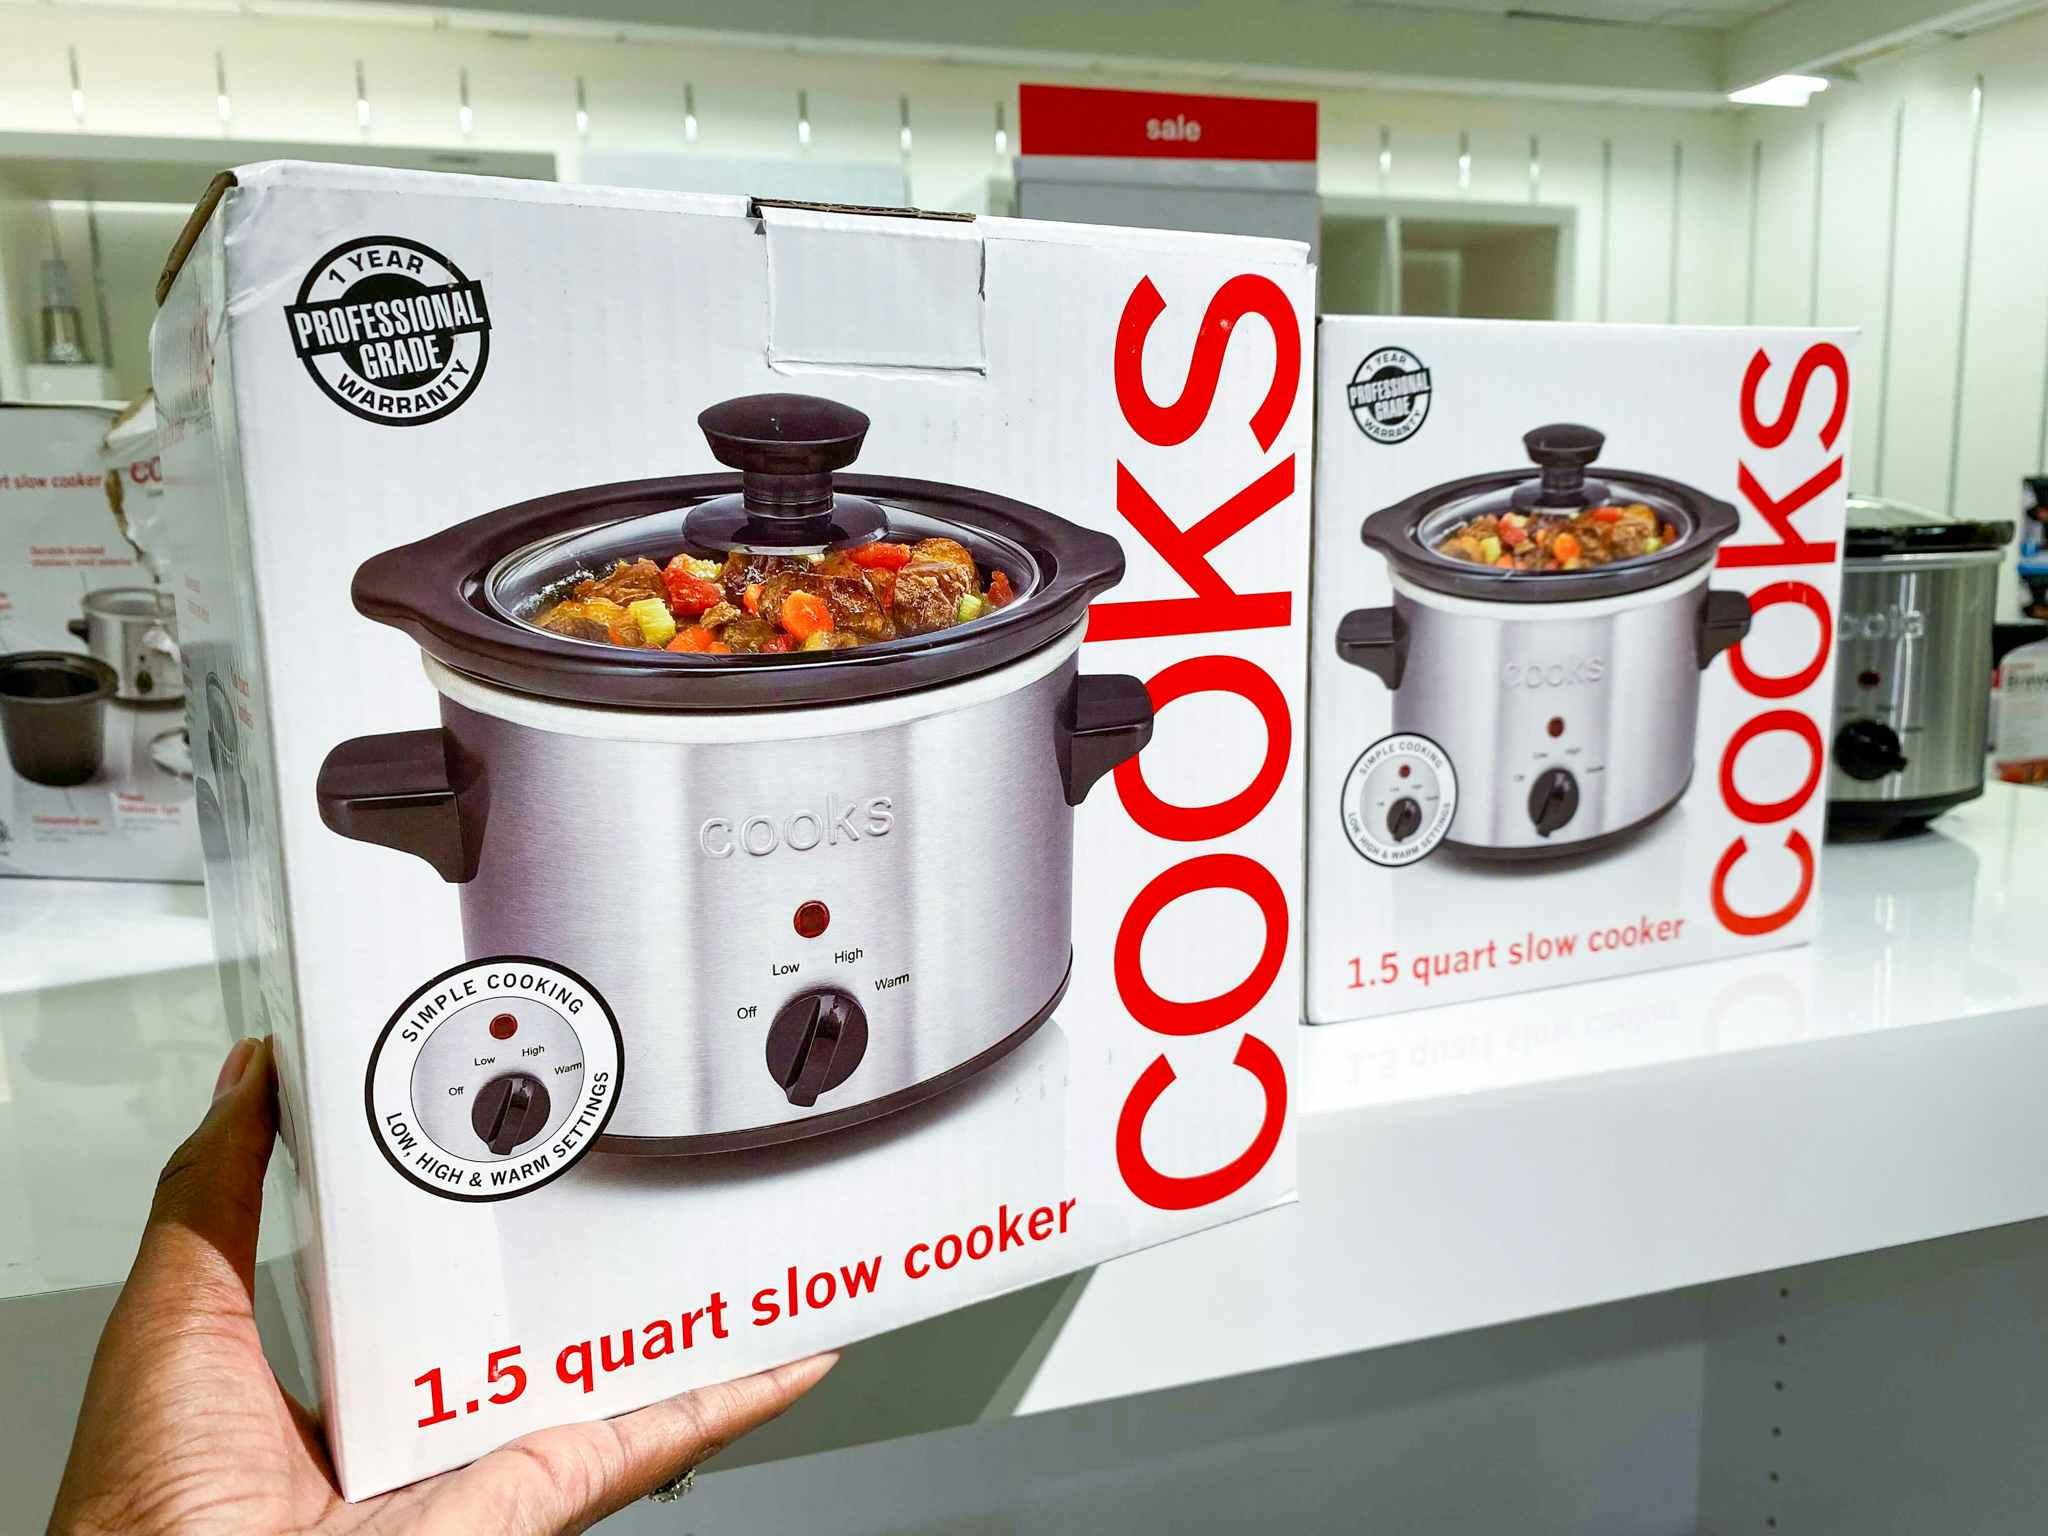 hand holding slow cooker box